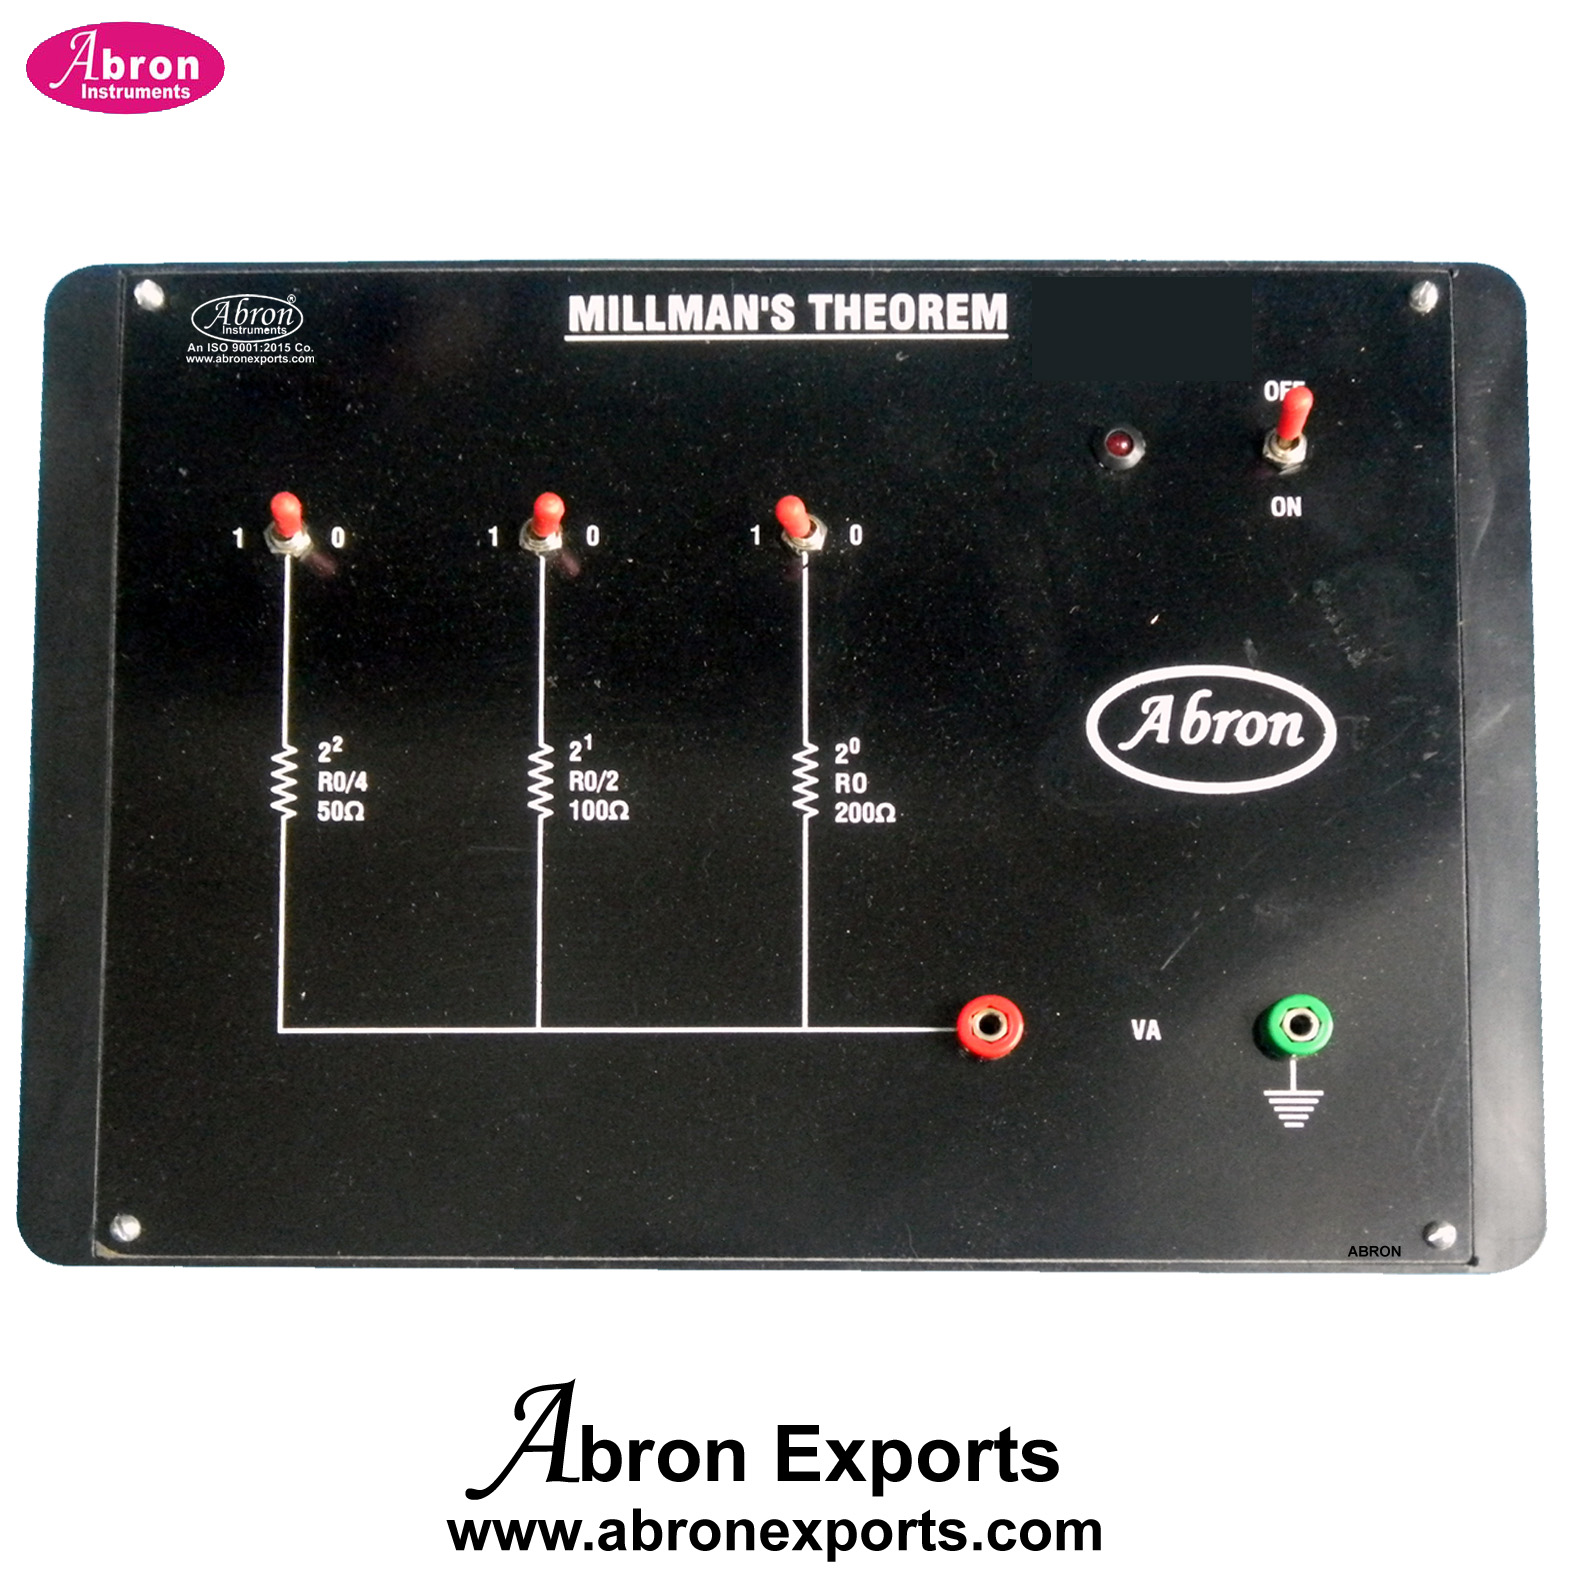 Study Theorem Millmans Network Theorem With Power Supply Electronic Trainer kit Abron AE-1430MM 